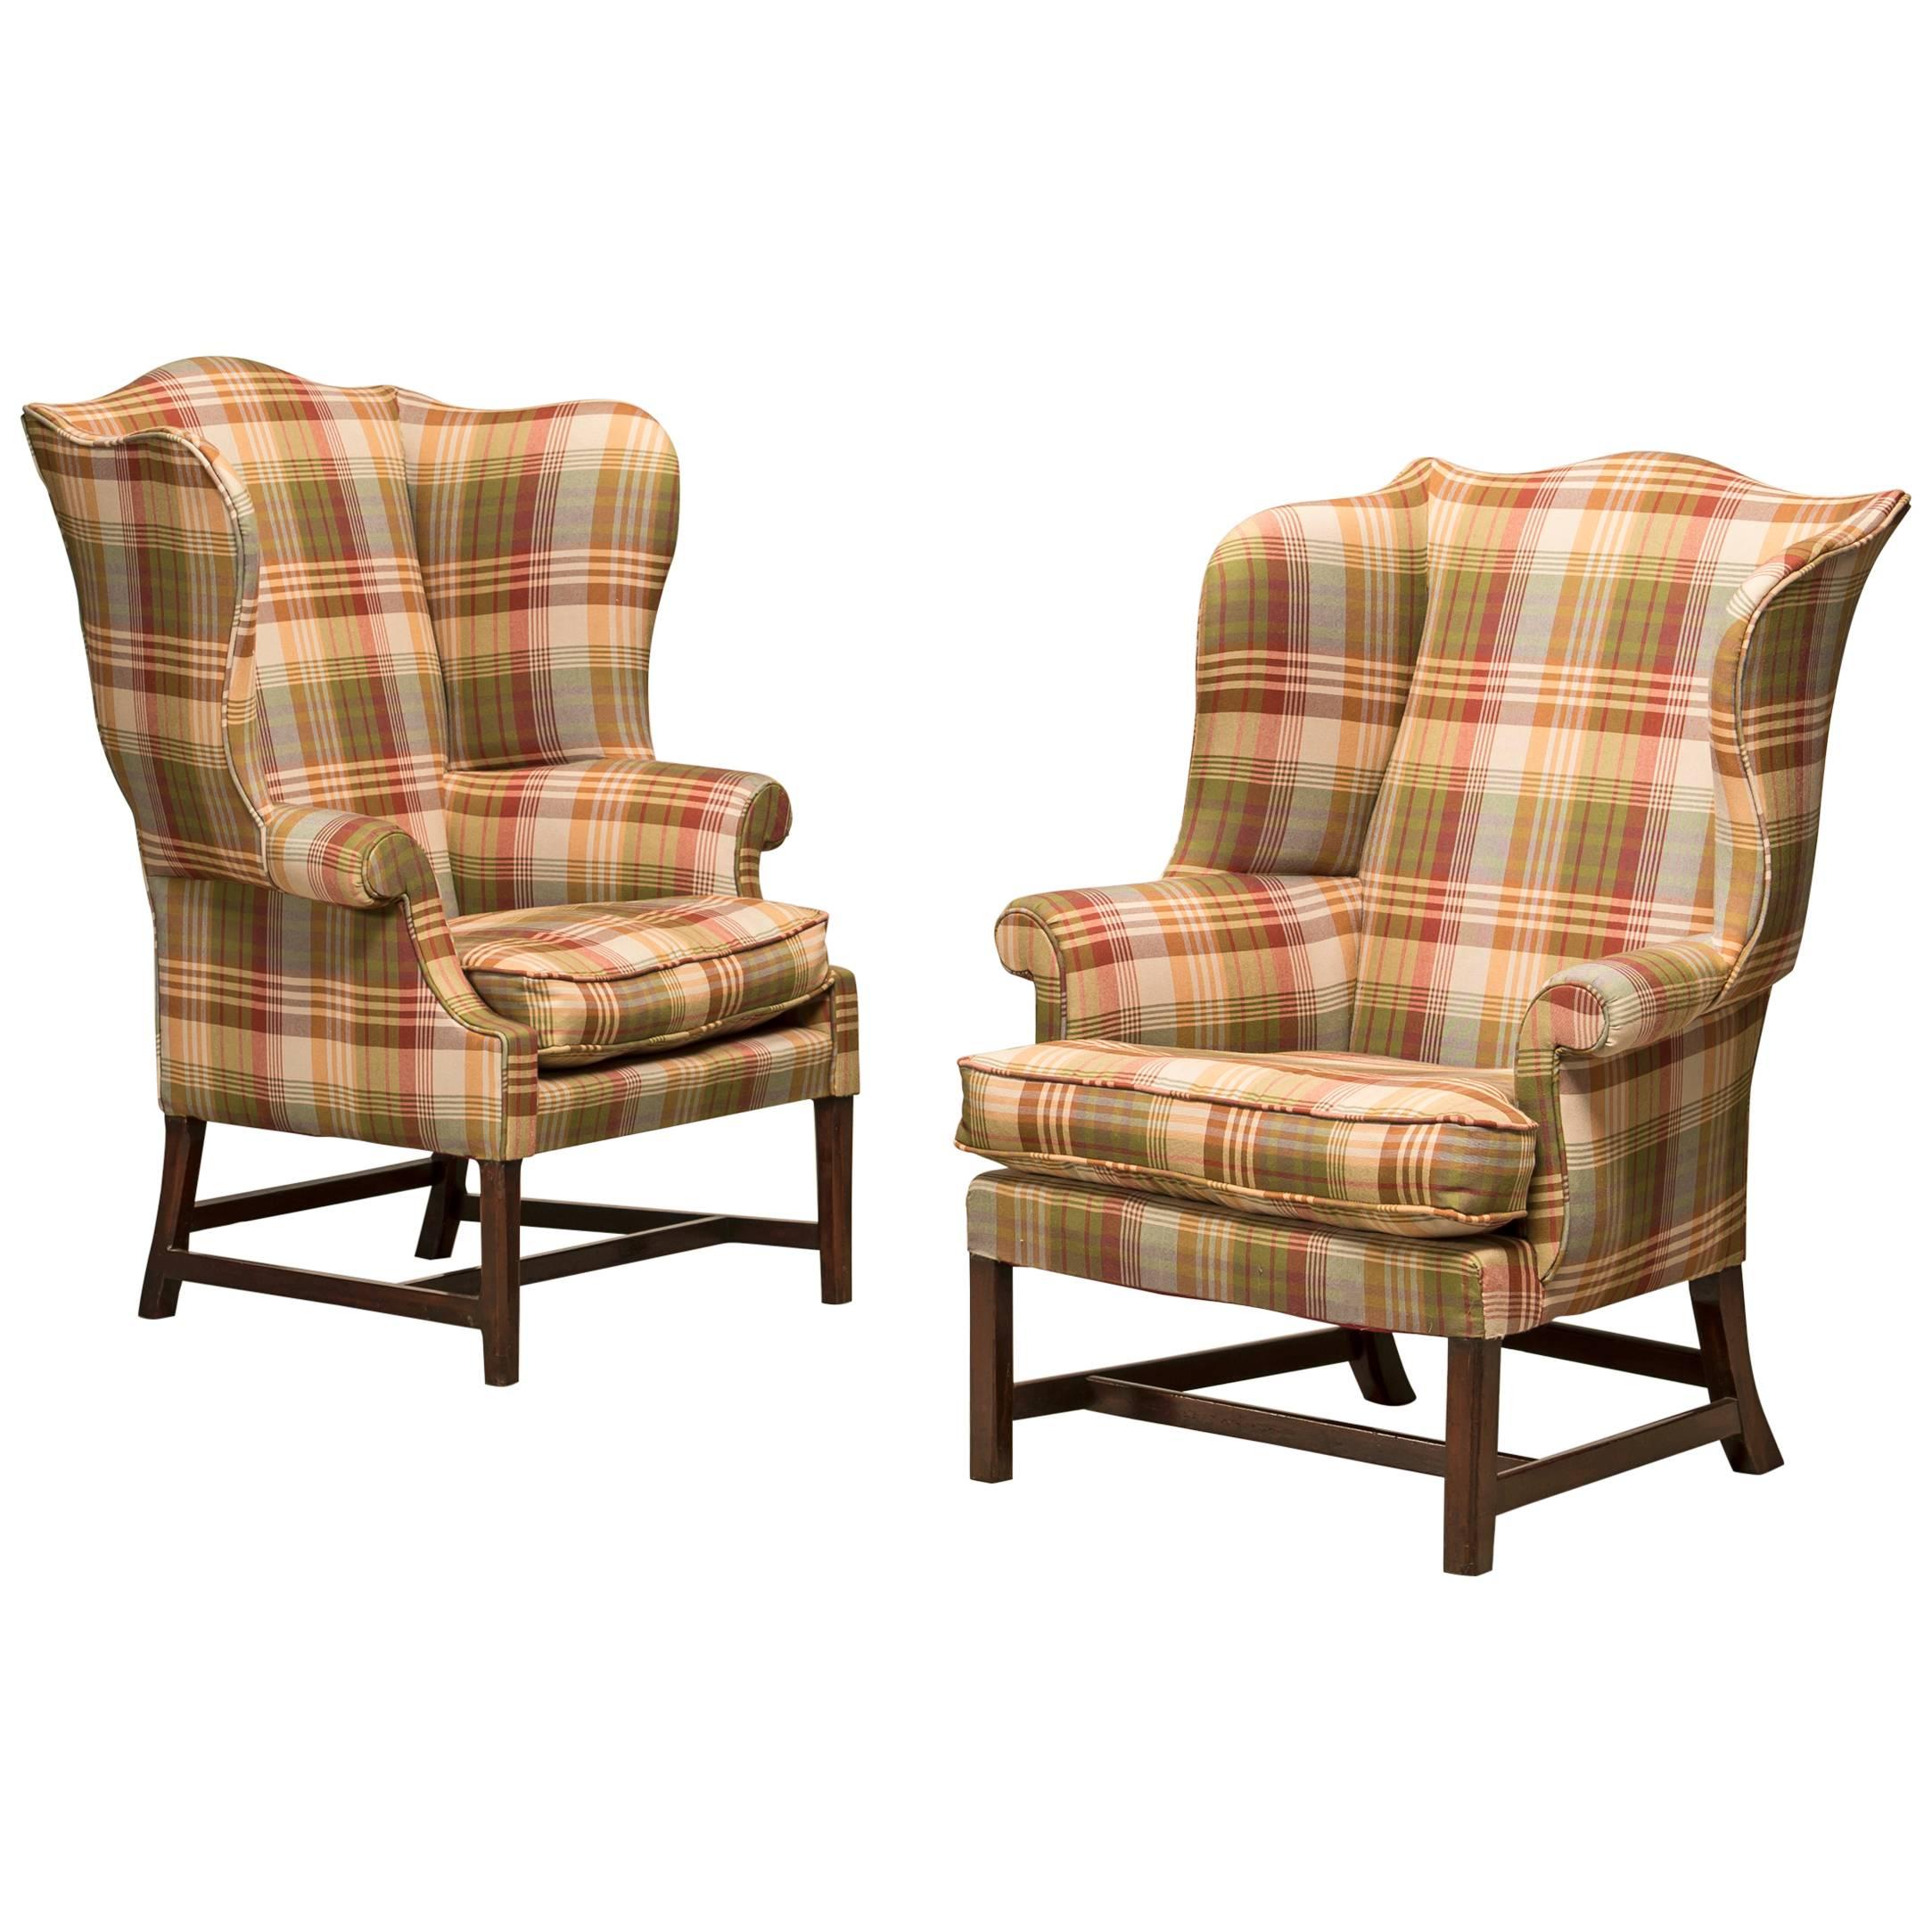 Pair of Chippendale Wingchairs Reupholstered with Fabric from Mulberry